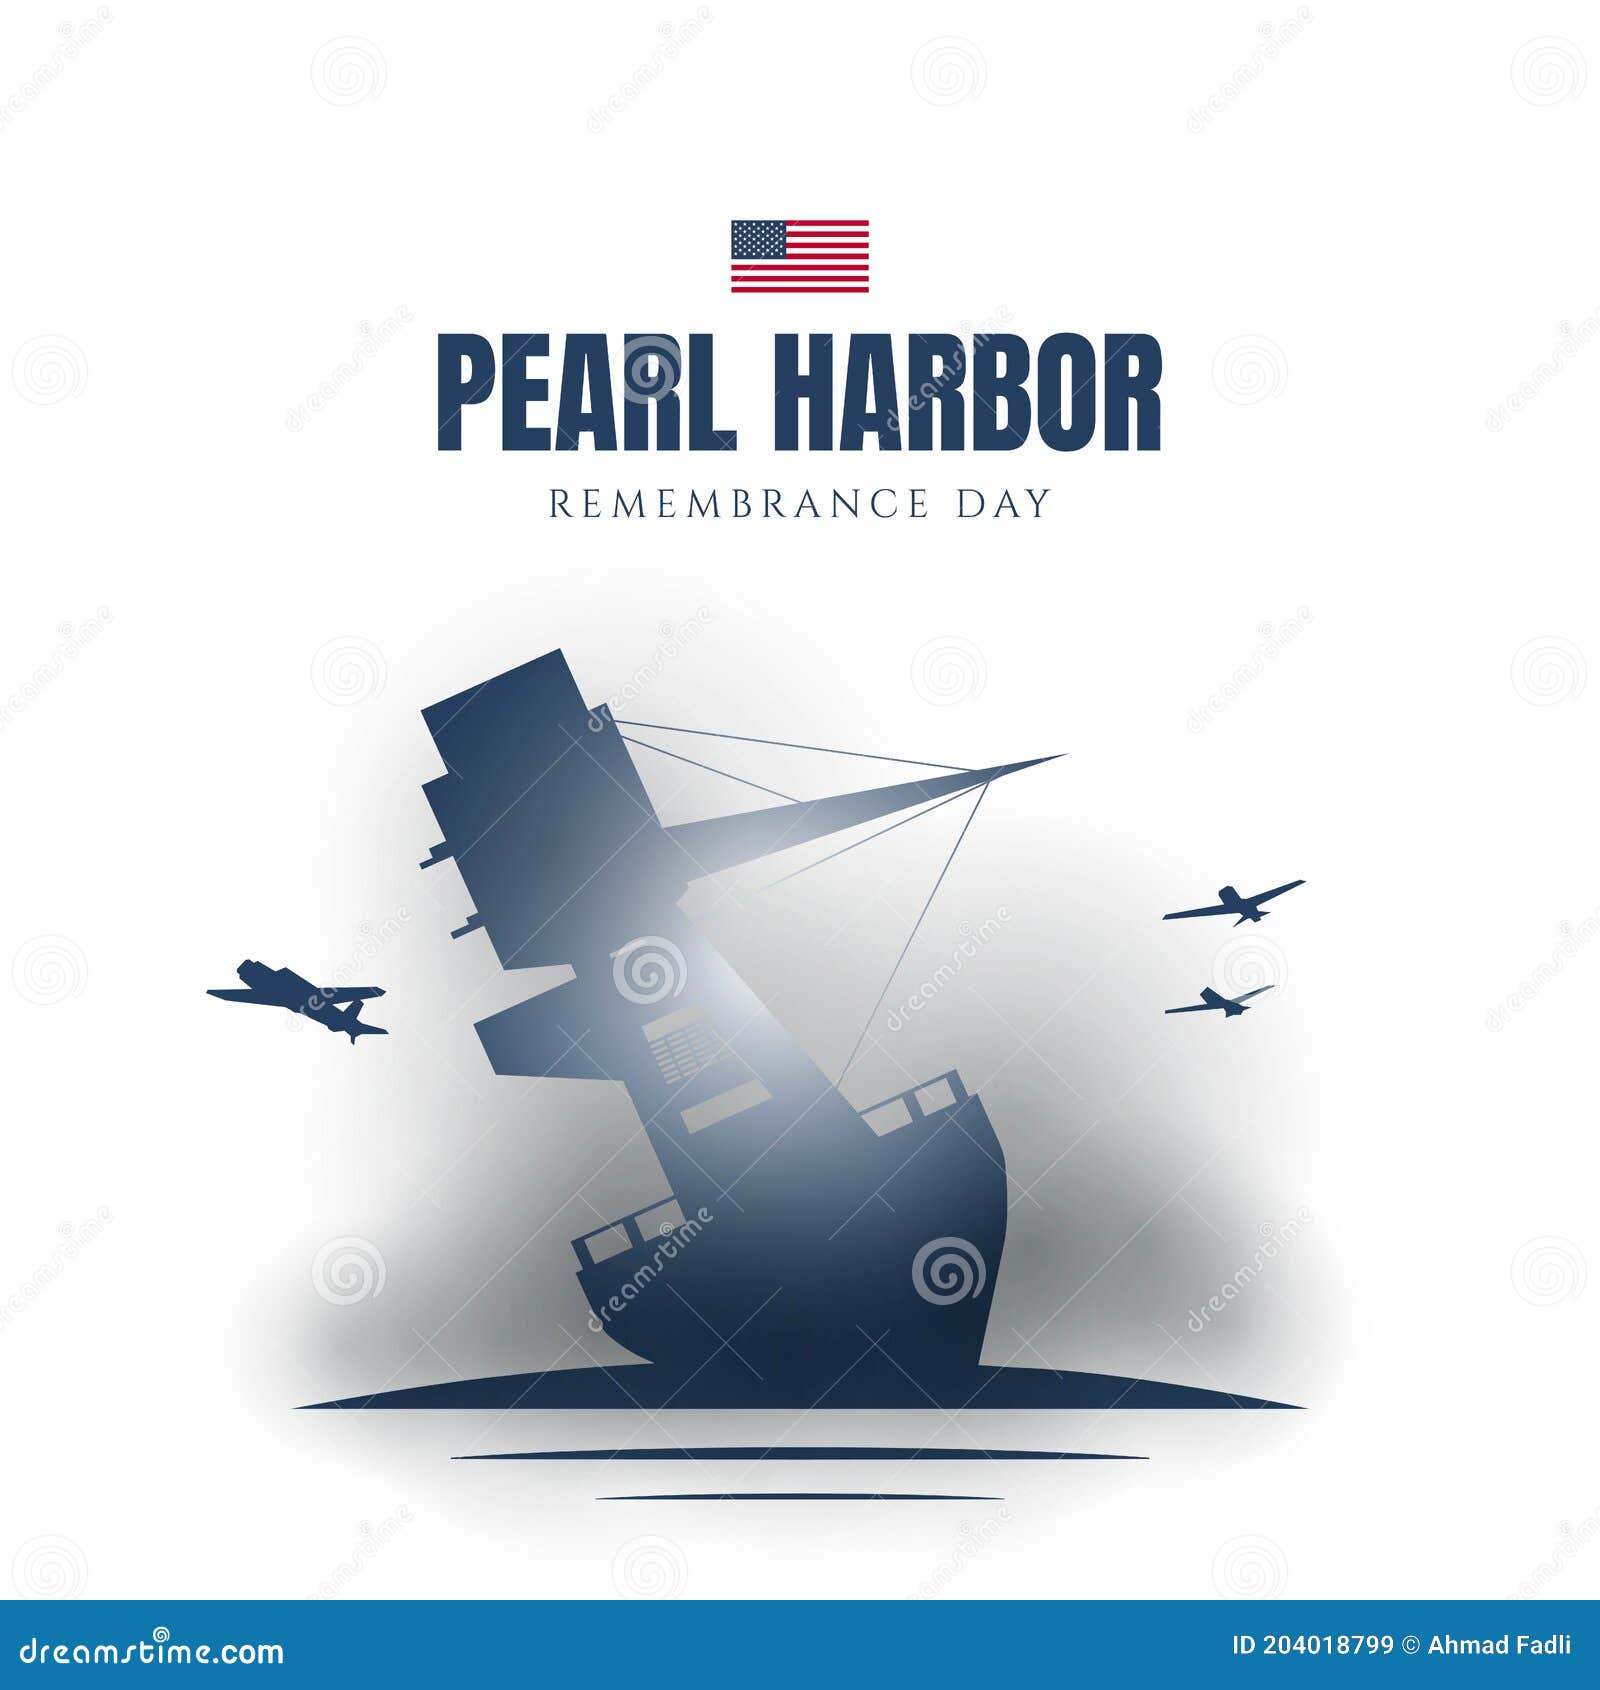 pearl harbor remembrance day background